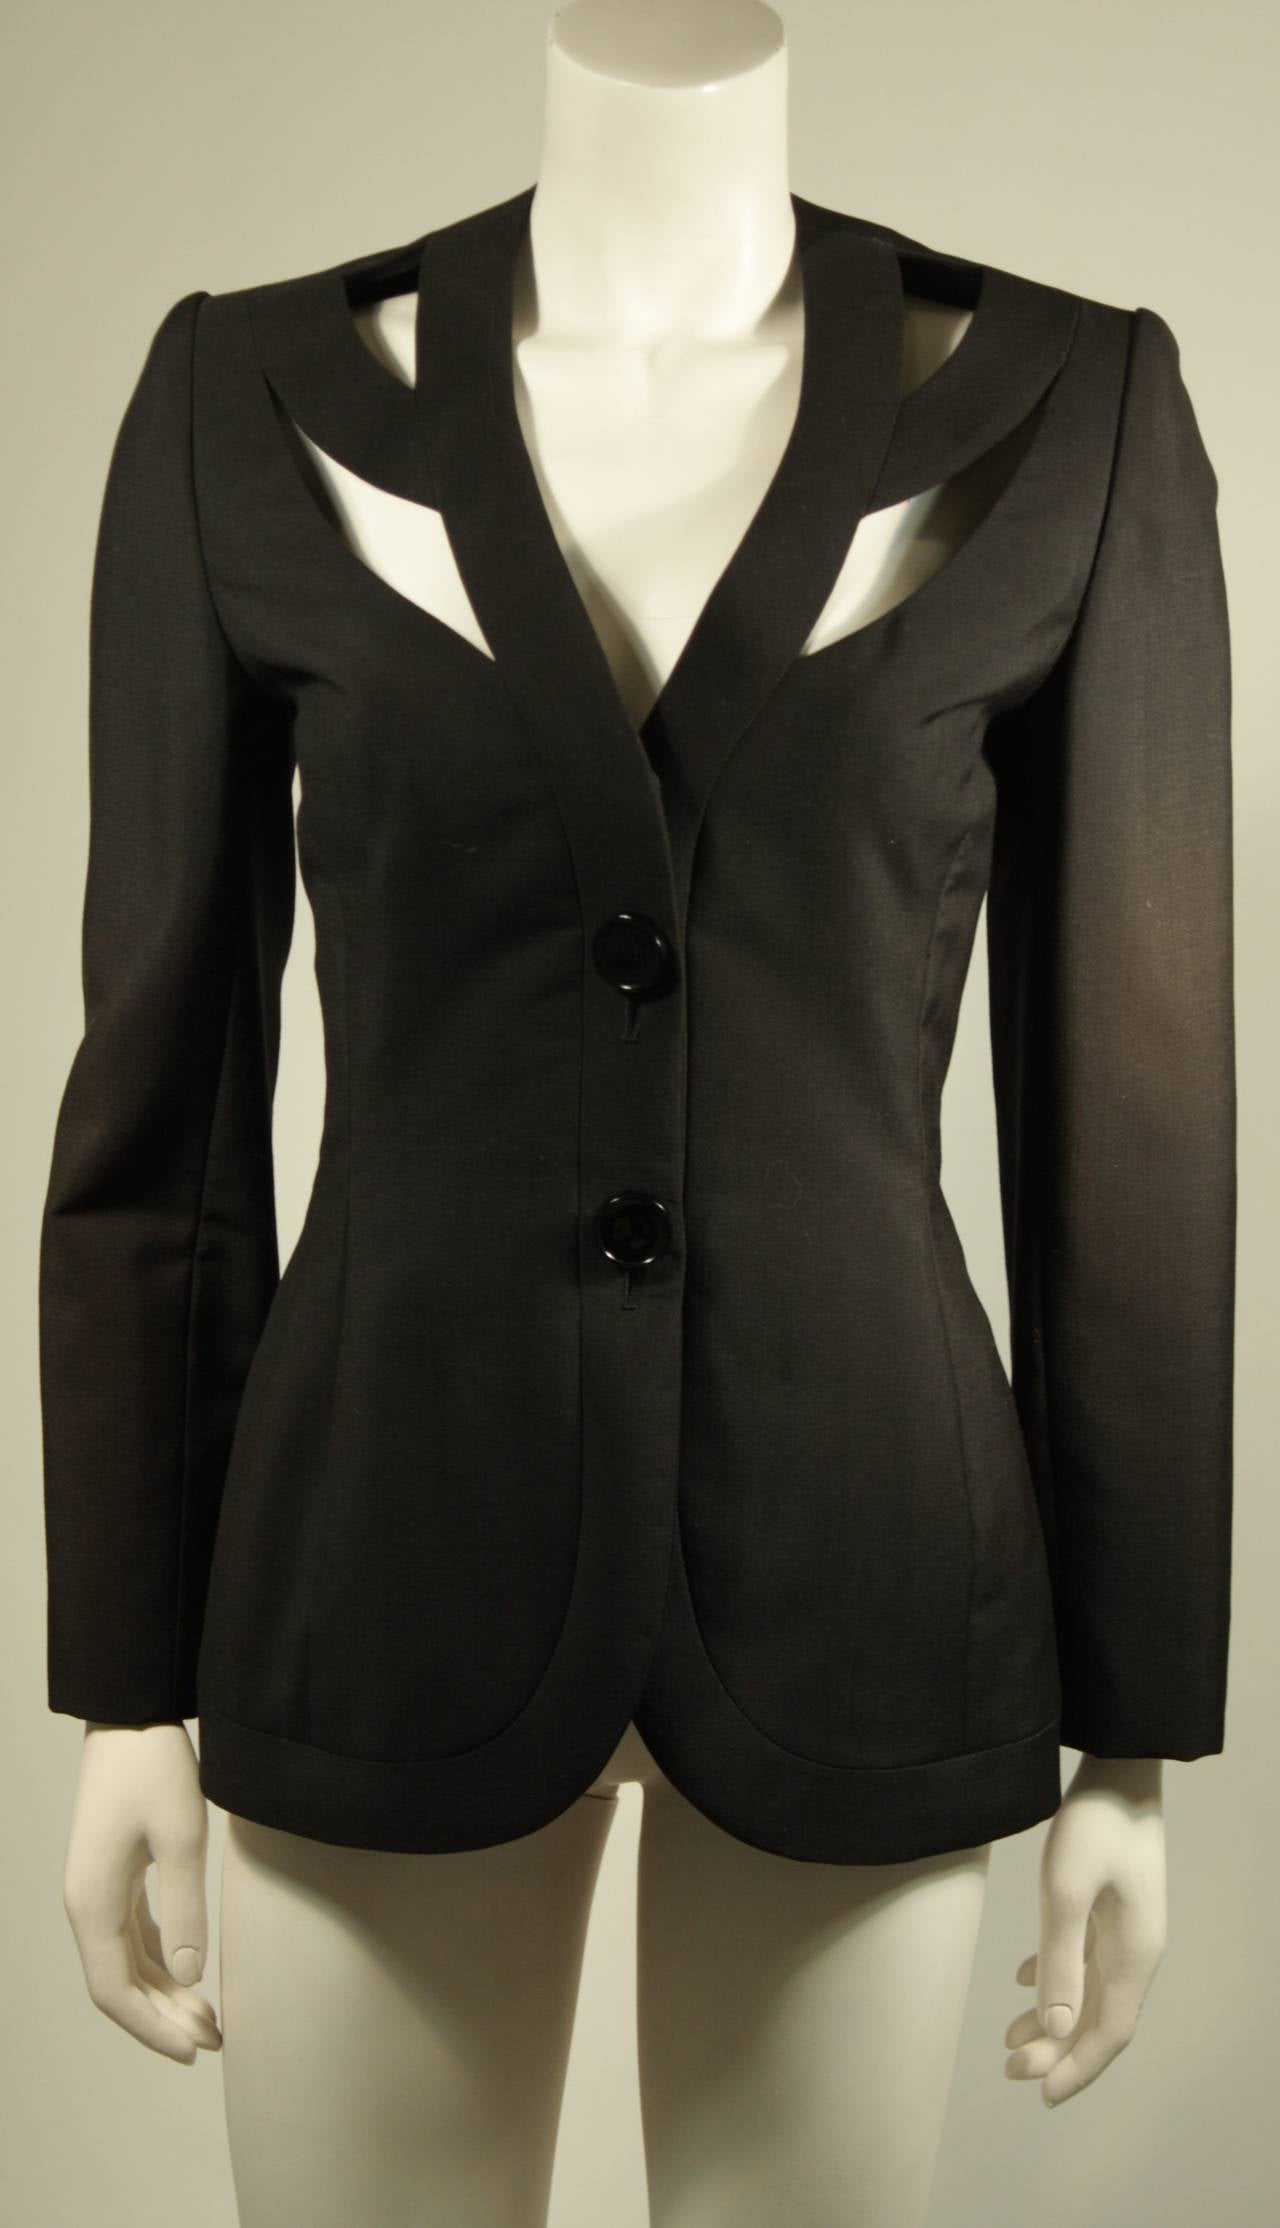 GALANOS HAUTE COUTURE Betsy Bloomingdale Black Skirt Suit with Cut-Out Details 4